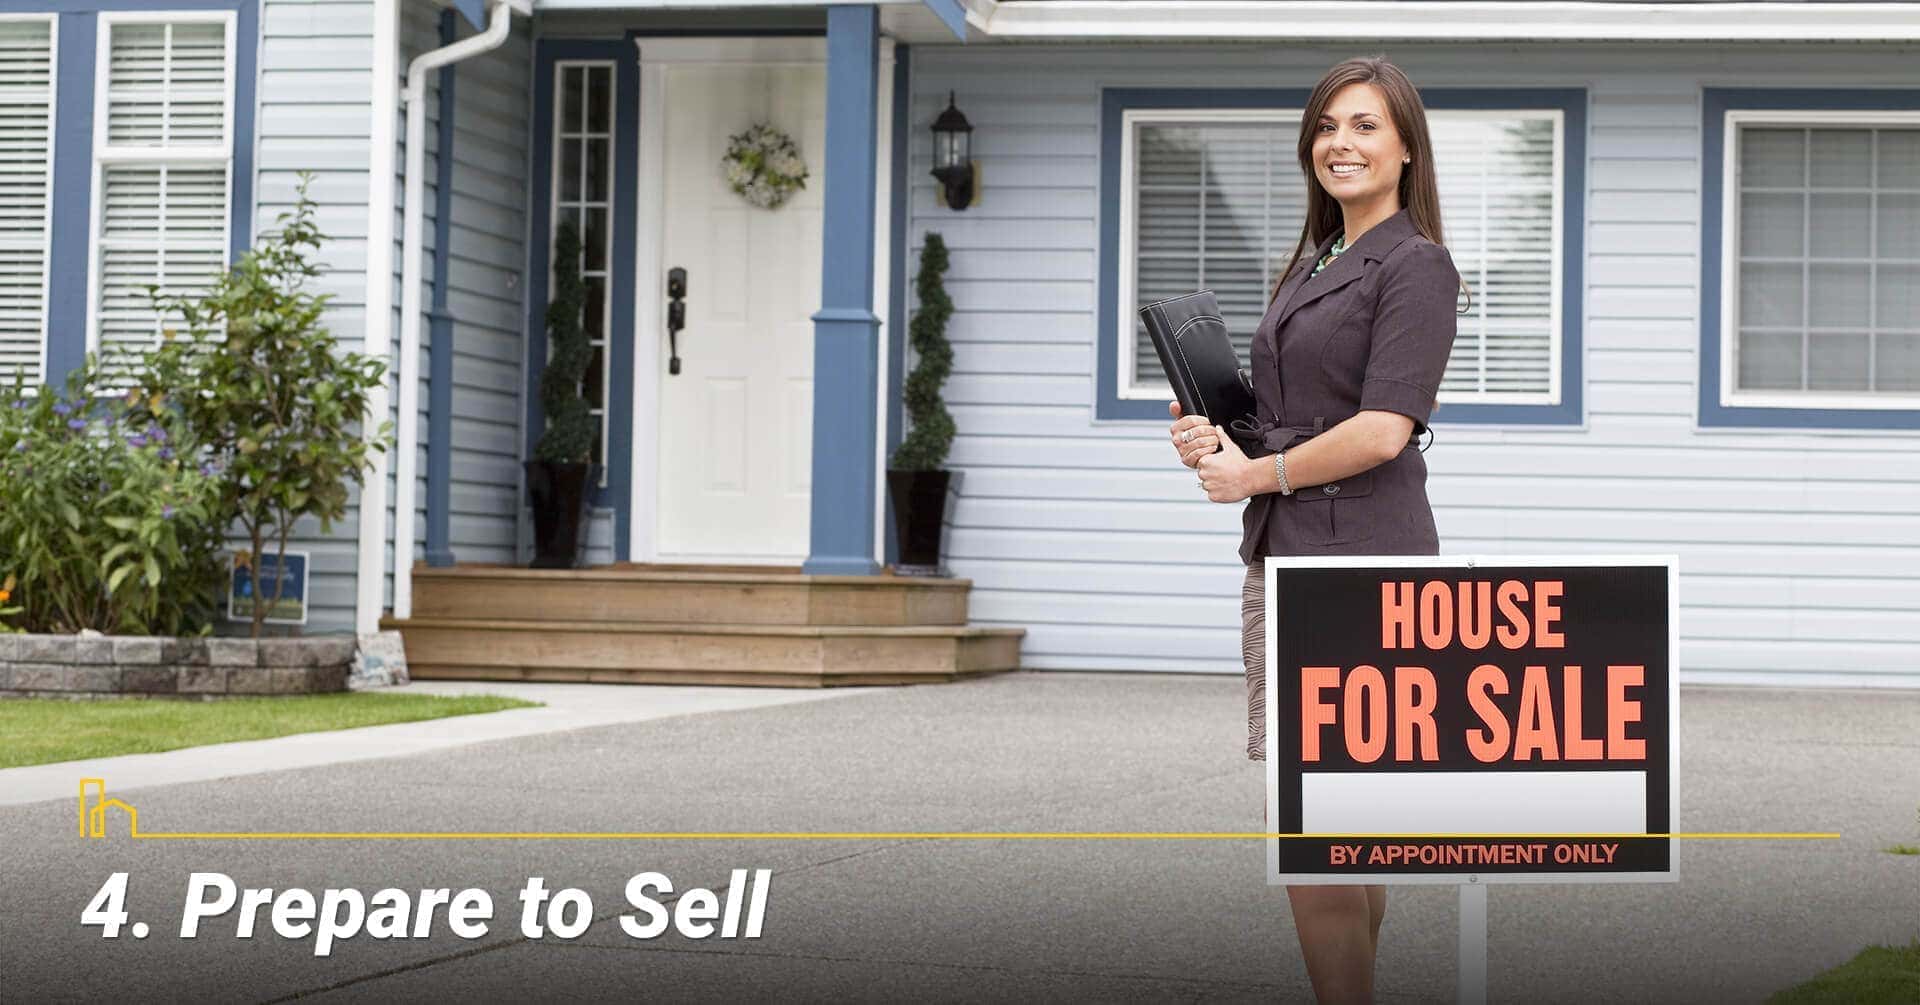 Prepare to Sell, get your property ready to sell